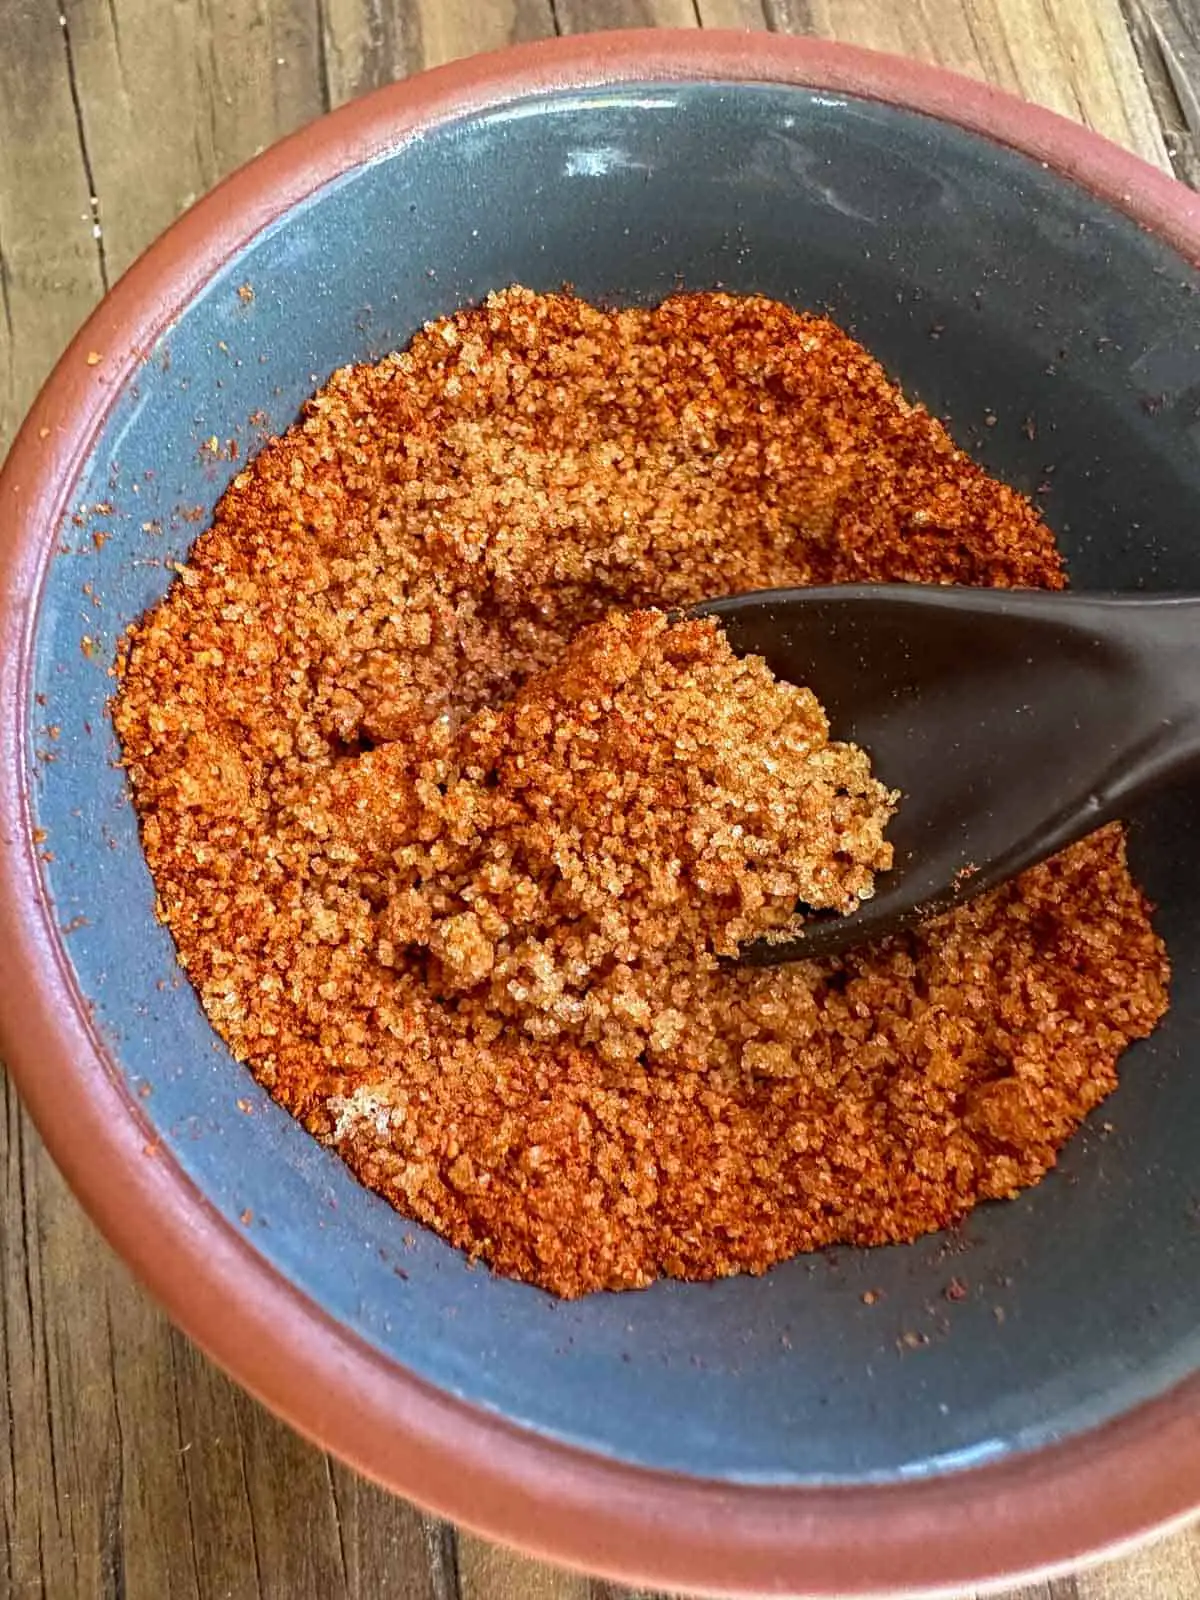 A small bowl containing a mixture of brown sugar and Scorpion pepper powder. There is a spoon with some of the mixture in it in the bowl.